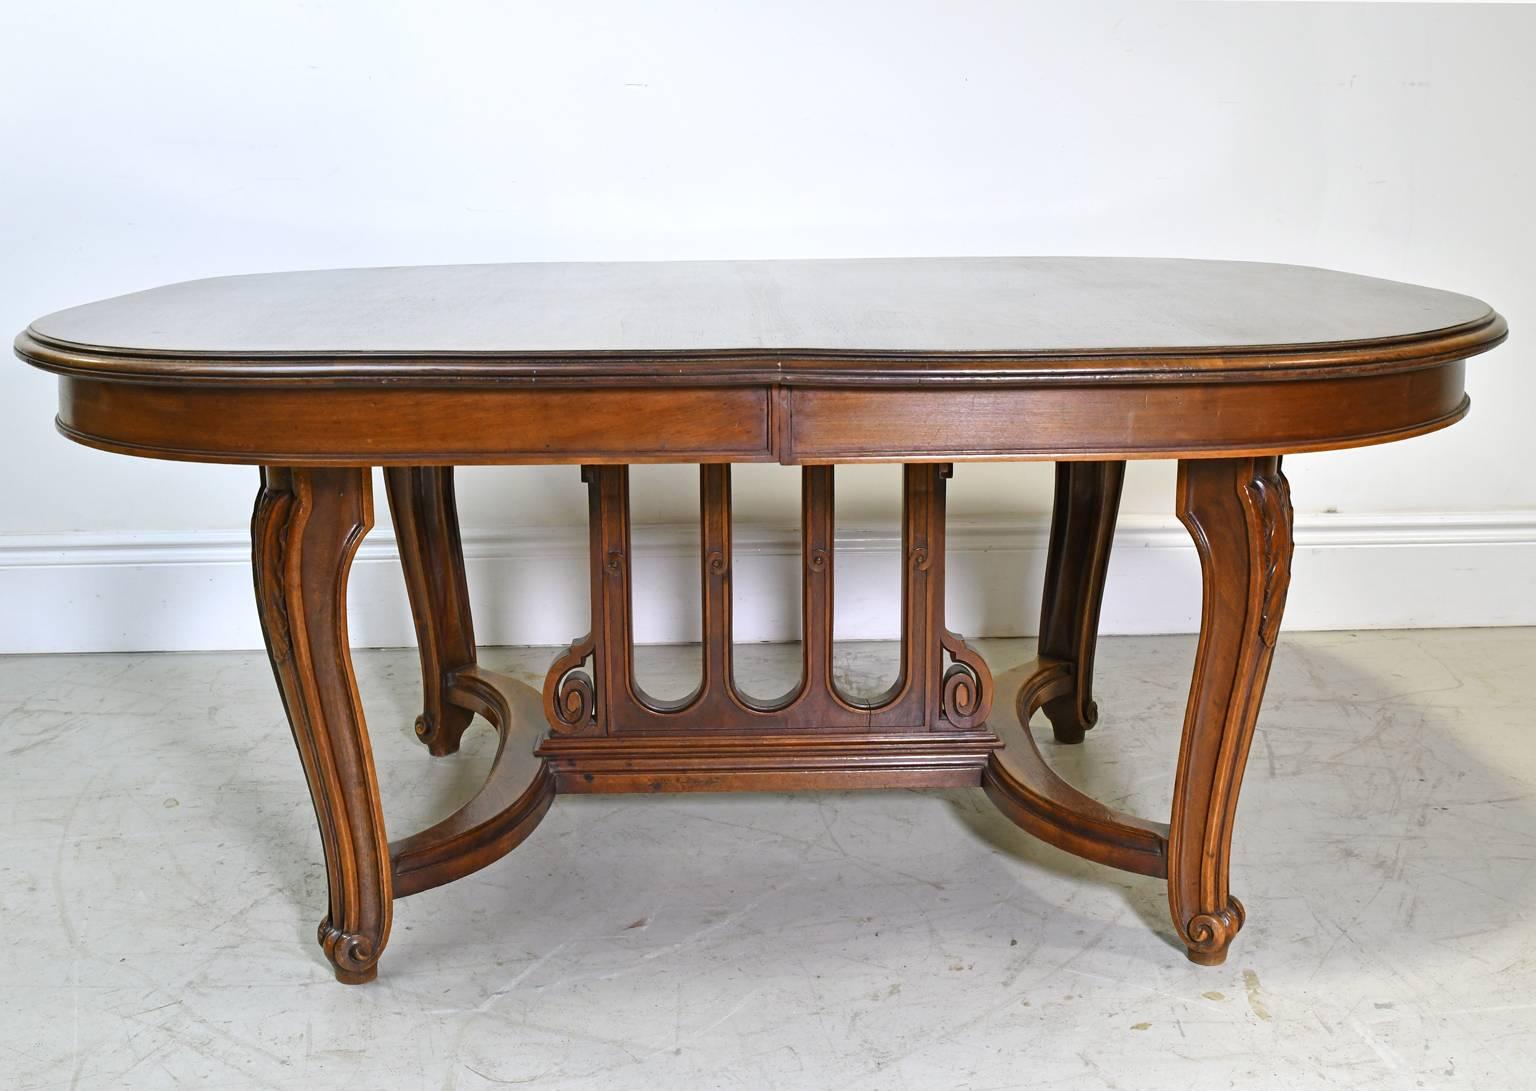 A beautiful Belle Époque coffee table in walnut featuring a racetrack top, carved cabriole legs with scrolled feet that are joined by an 